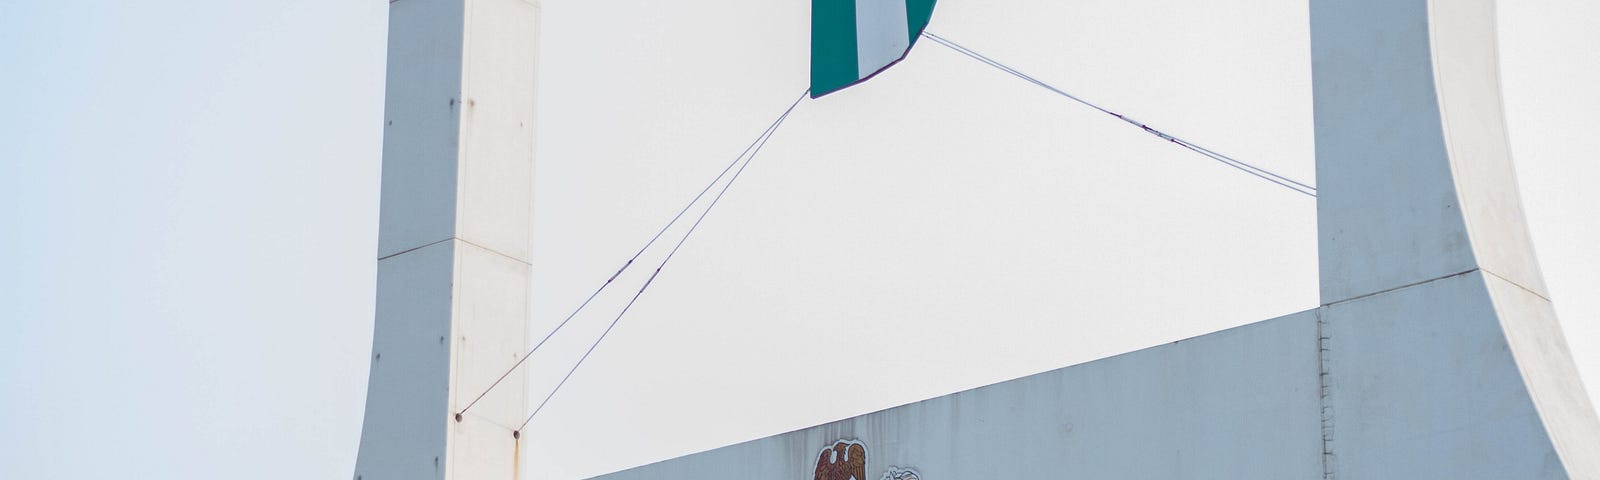 A welcome sign with the Nigerian flag and coat of arms